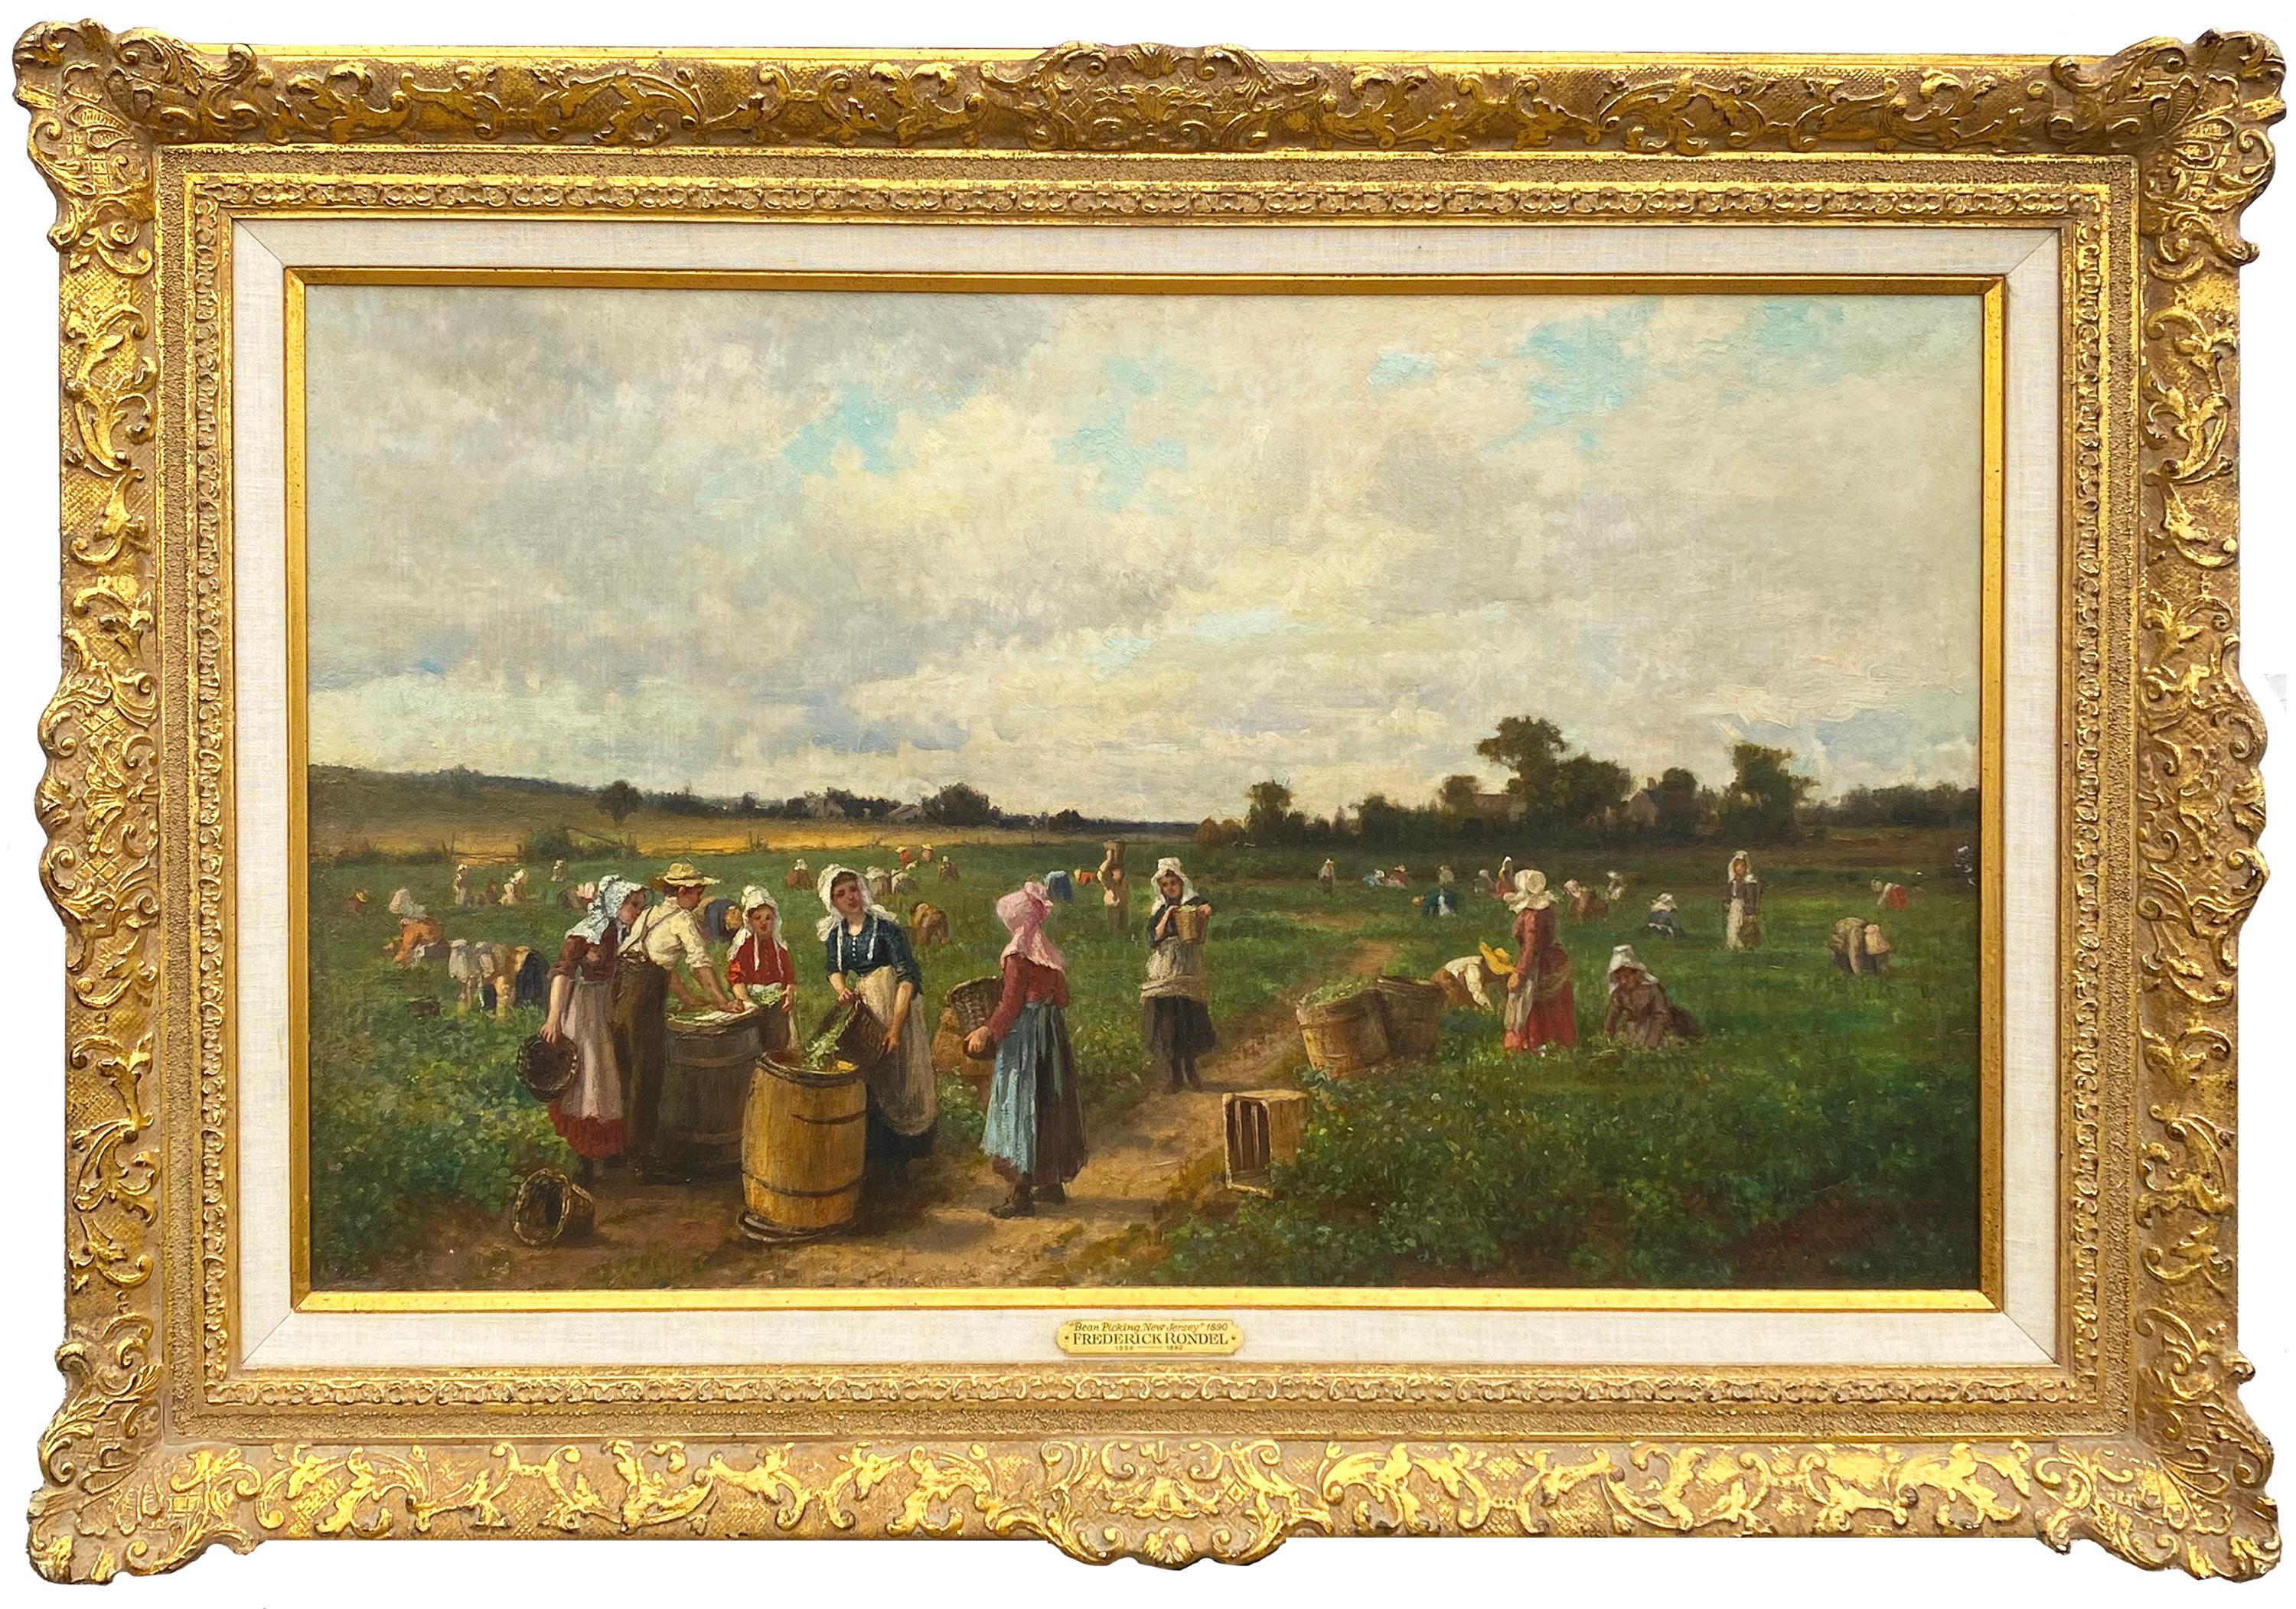 Bean Picking, New Jersey, 1890 - Painting by Frederick Rondel